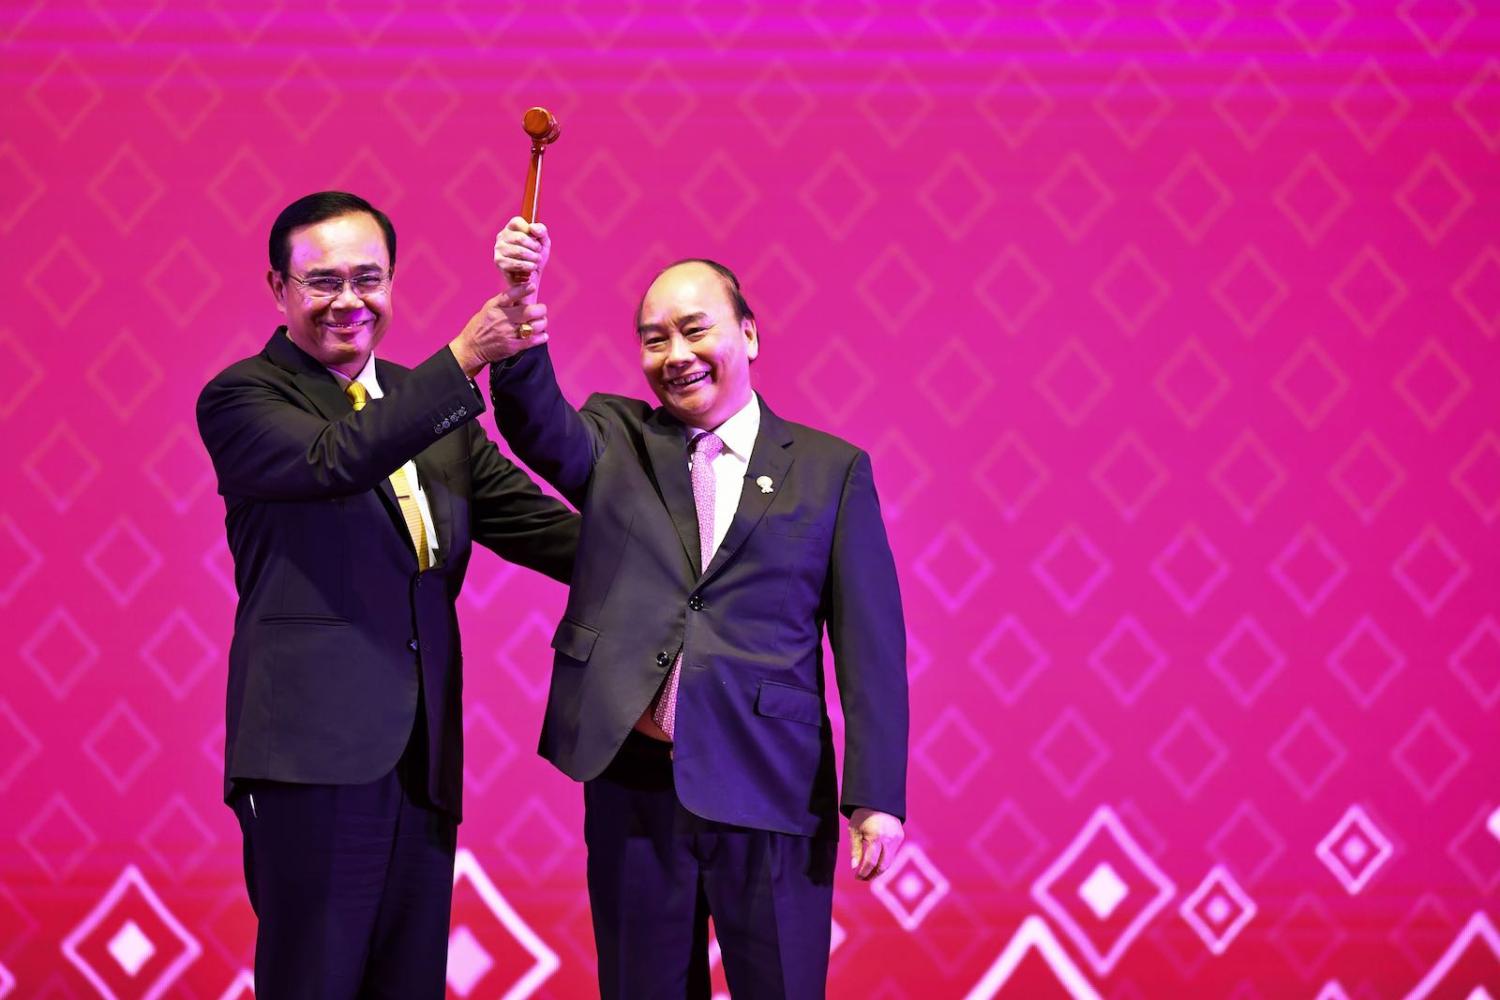 Vietnam’s Prime Minister Nguyen Xuan Phuc raises the gavel as ASEAN chair for 2020 after a handover from Thailand’s Prayut Chan-O-Cha (Photo: Lillian Suwanrumpha/AFP/Getty Images)  